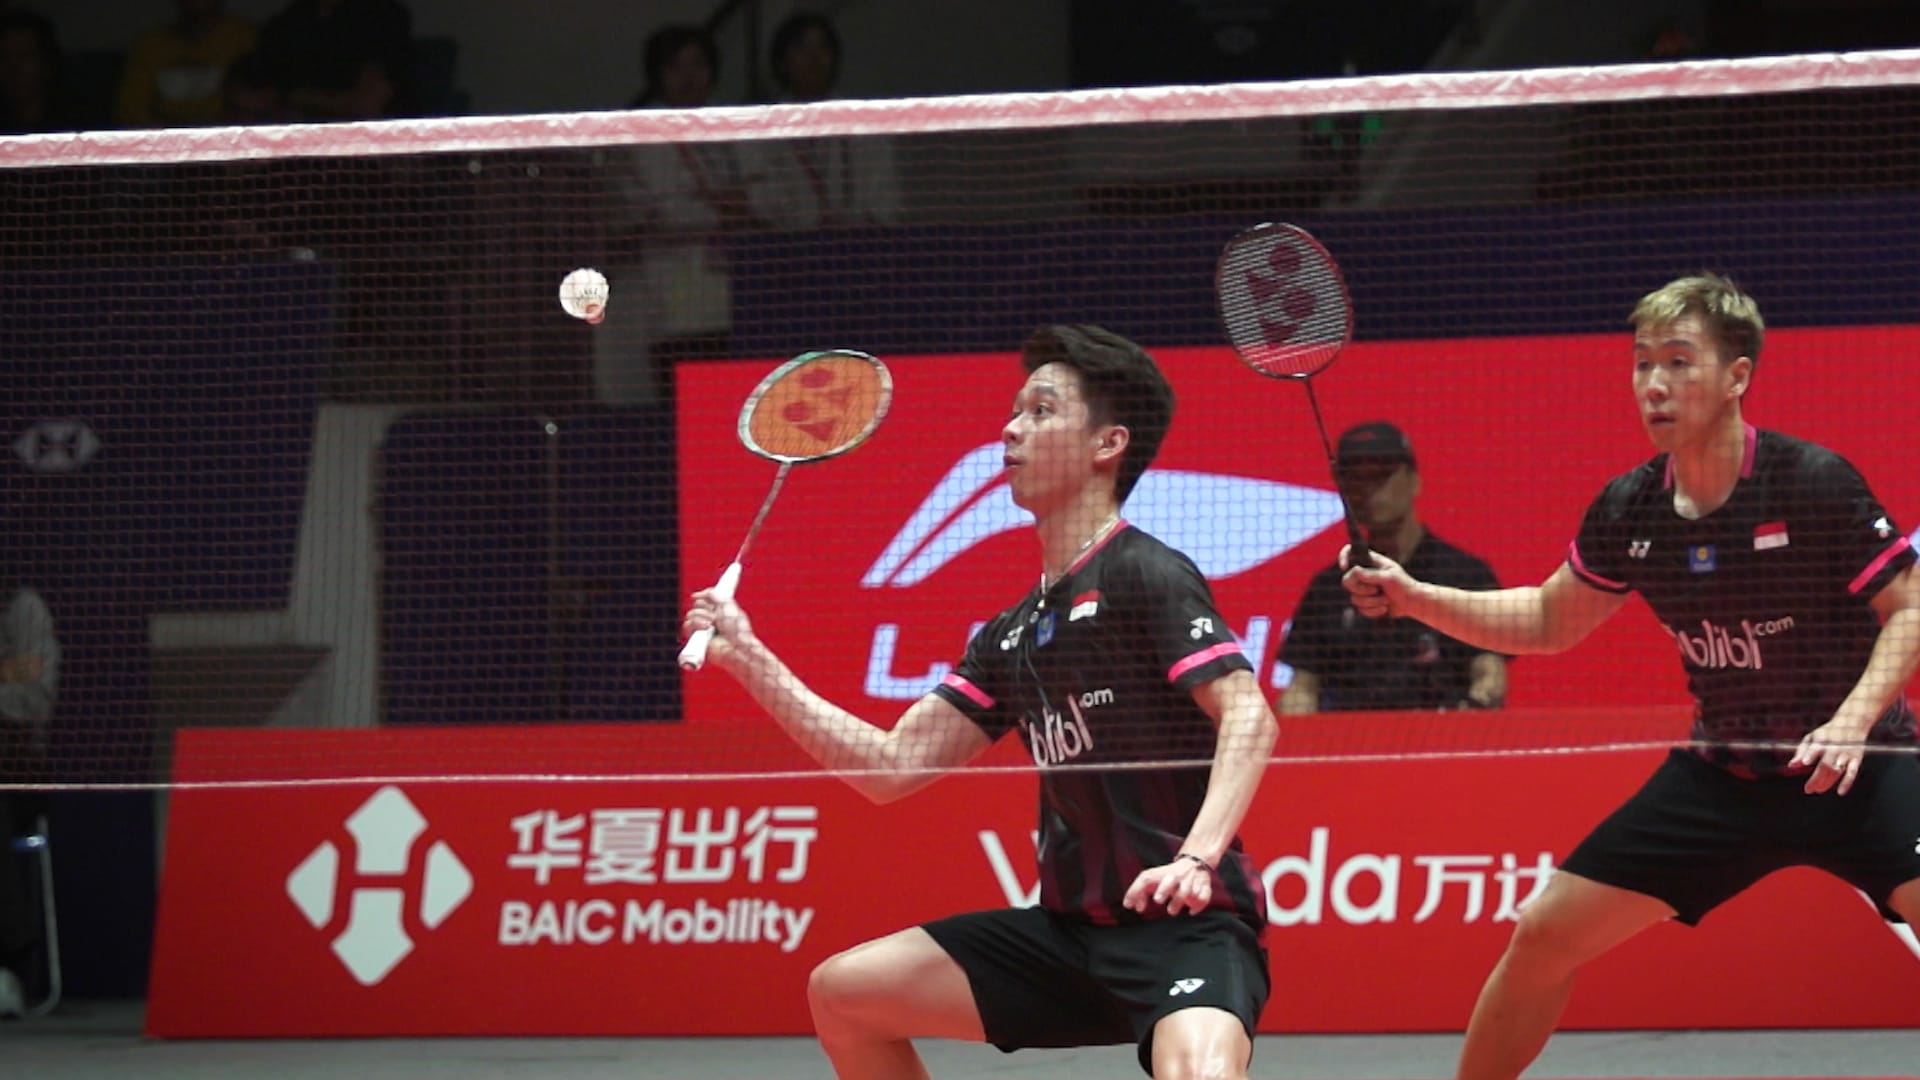 Gideon and Sukamuljo out of BWF Asian leg over Covid positive